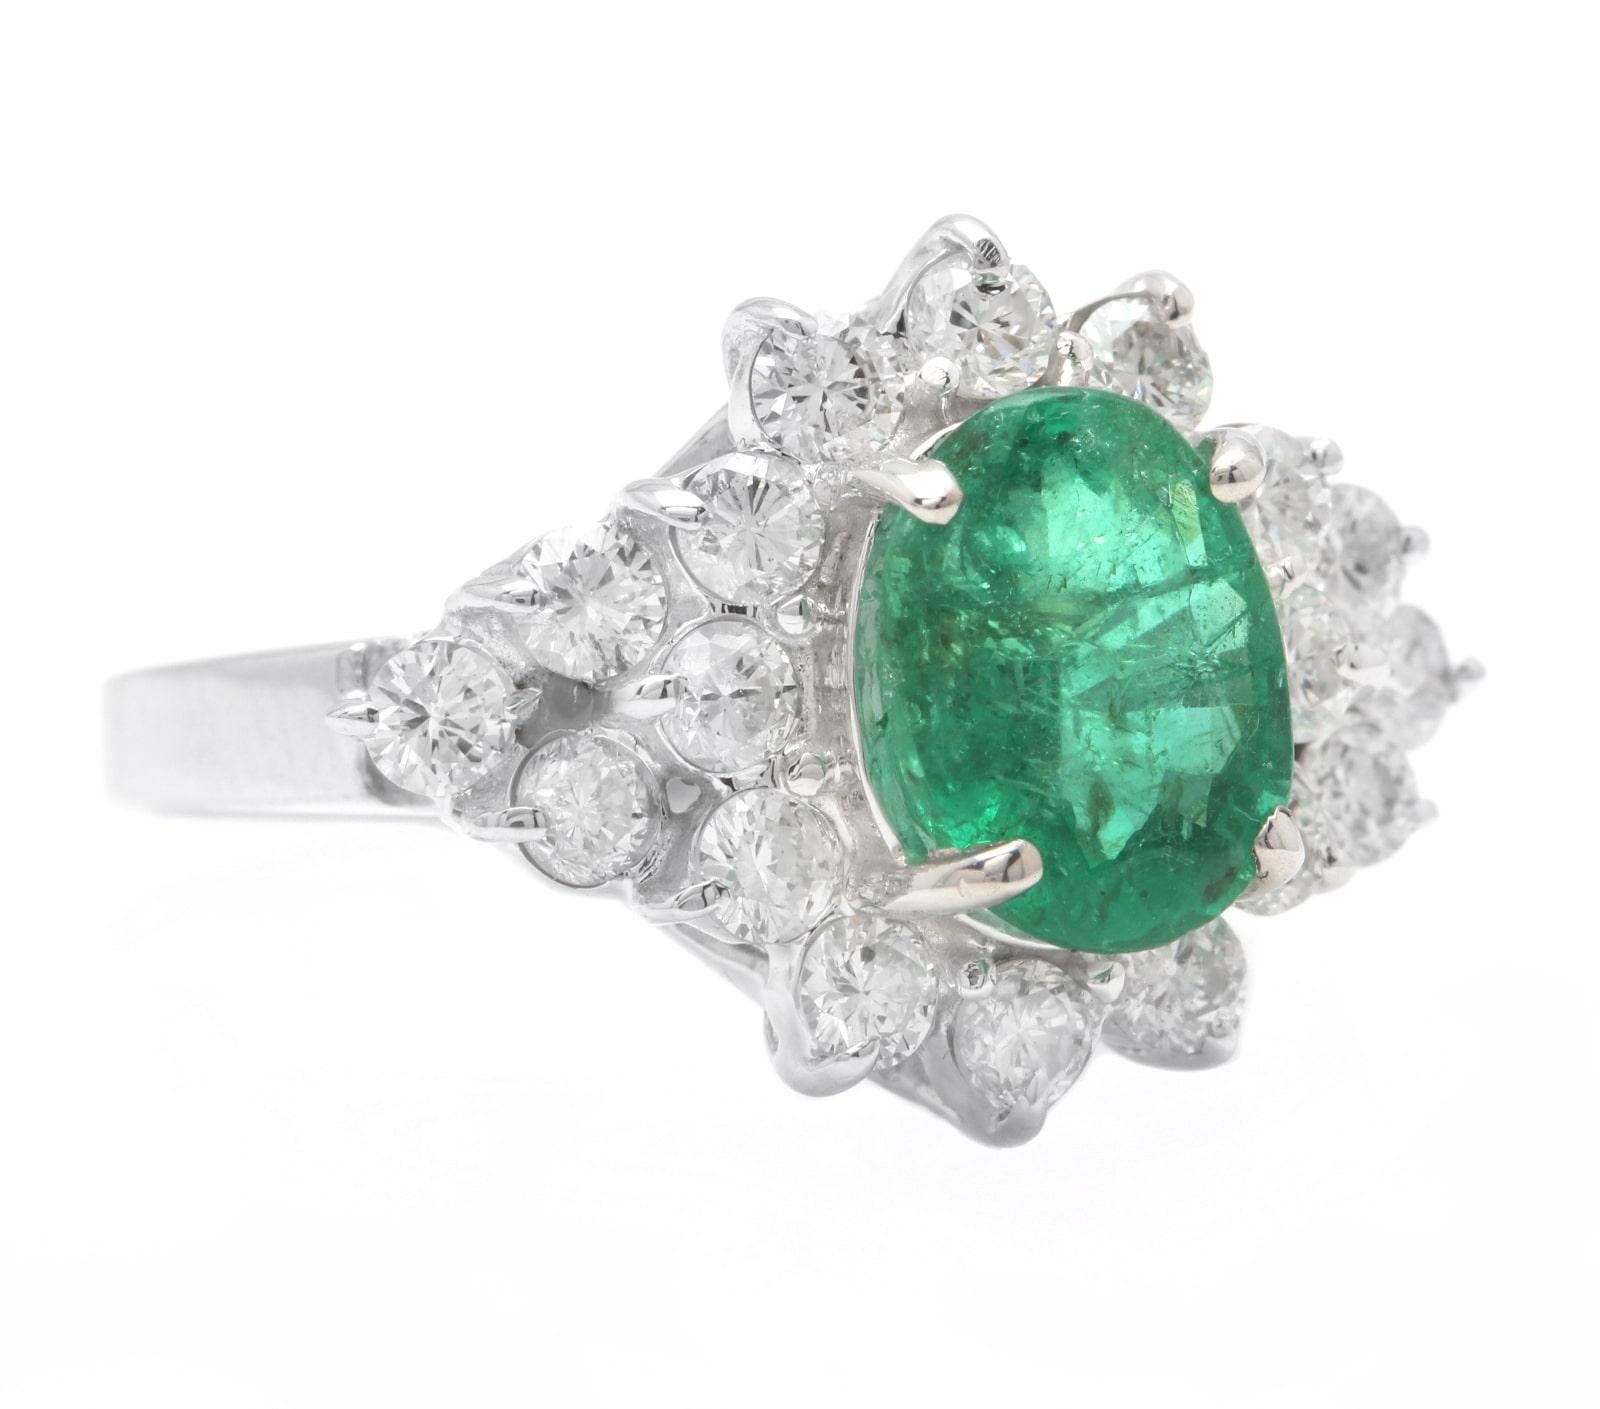 3.60 Carats Natural Emerald and Diamond 14K Solid White Gold Ring

Suggested Replacement Value: $5,500.00

Total Natural Green Emerald Weight is: Approx. 2.50 Carats (transparent)

Emerald Measures: 9 x 7mm

Natural Round Diamonds Weight: Approx.